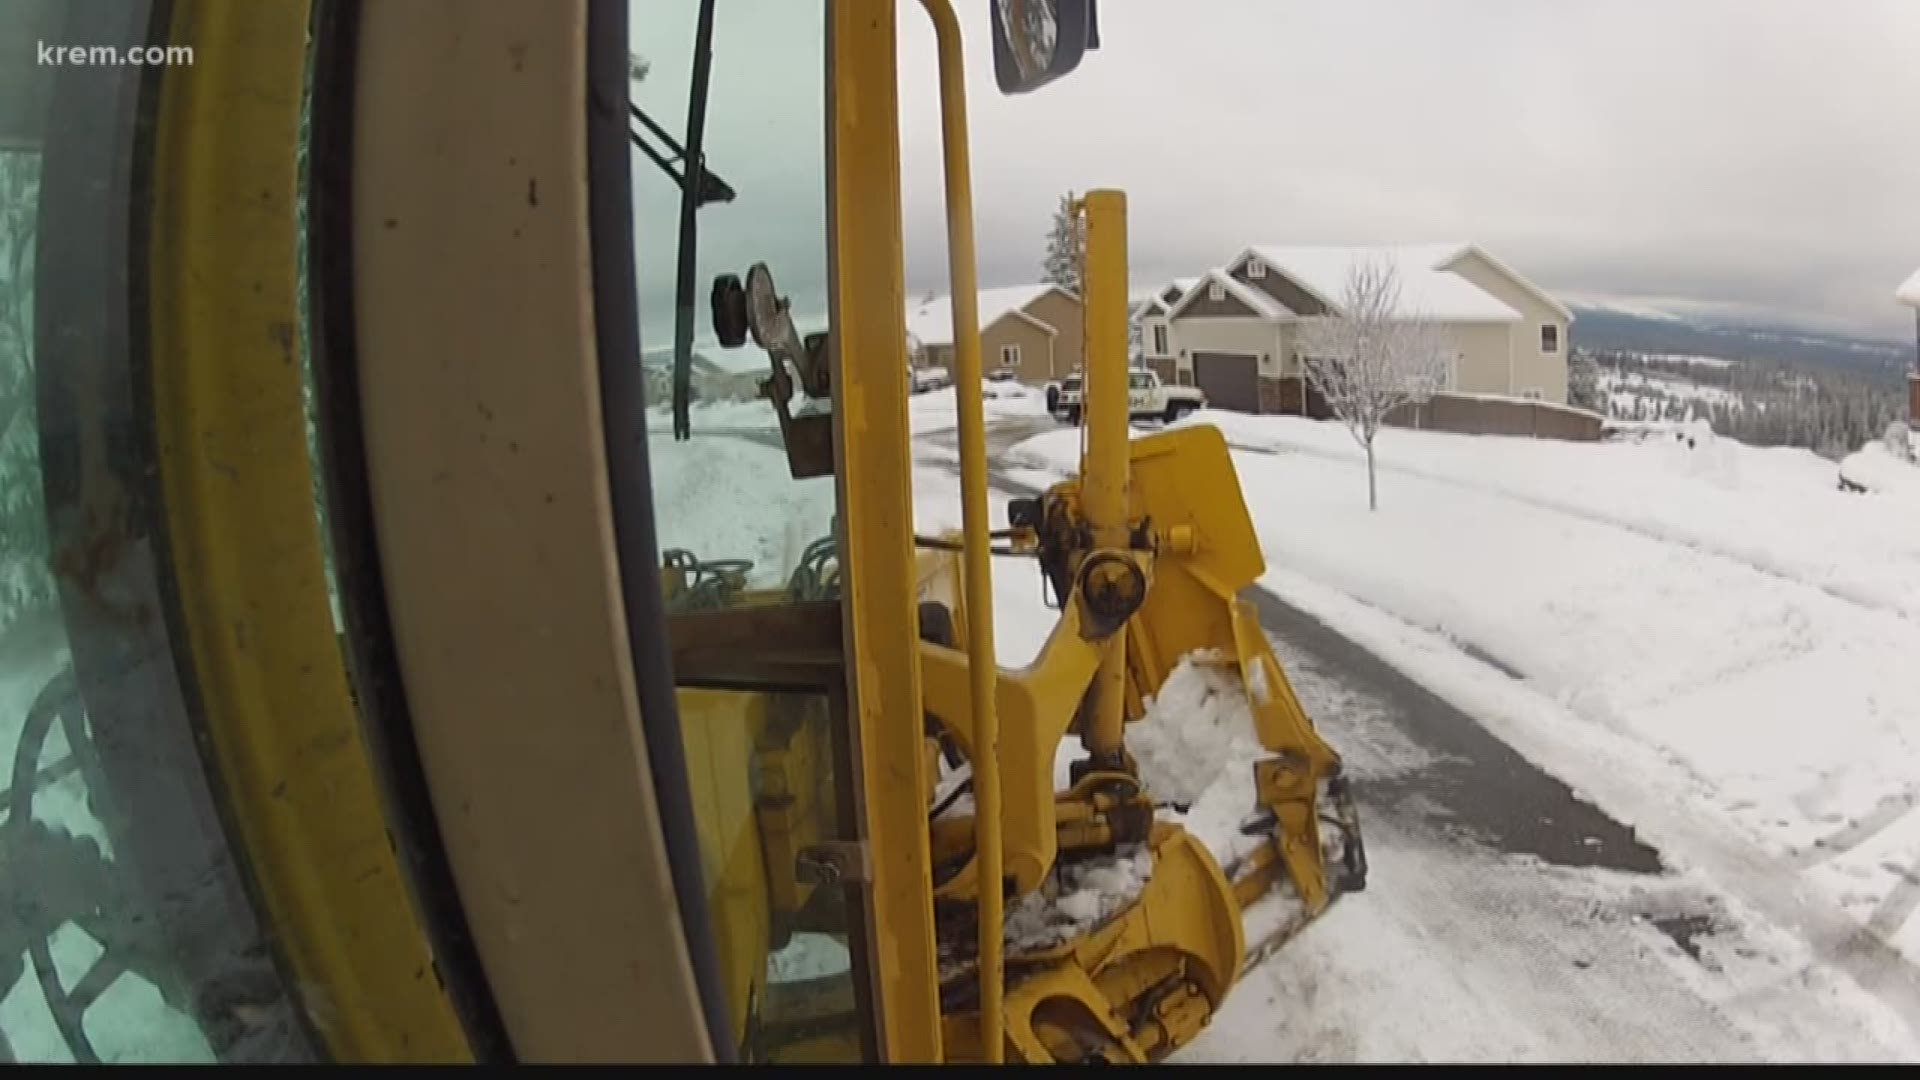 Two Spokane County snow plow drivers were threatened over the last few days. KREM 2's Amanda Roley explains what happened and how the county may respond to these incidents.